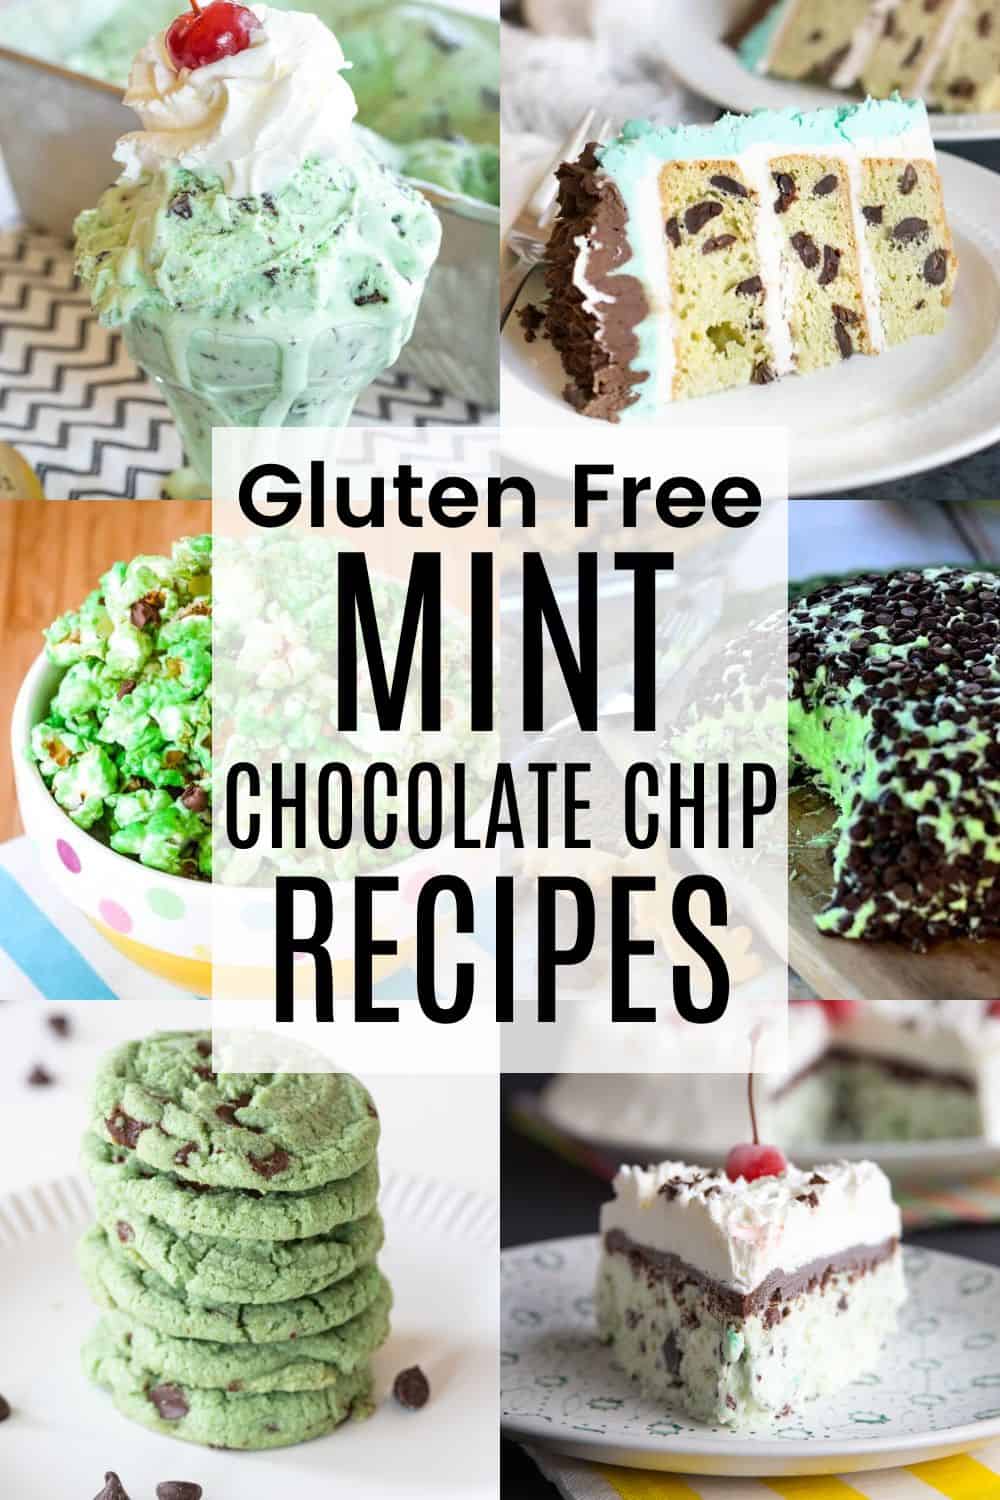 A two-by-three collage of desserts like mint chocolate chip ice cream, cookies, cake, and pie with a white translucent box in the middle with text overlay that says "Gluten Free Mint Chocolate Chip Recipes".